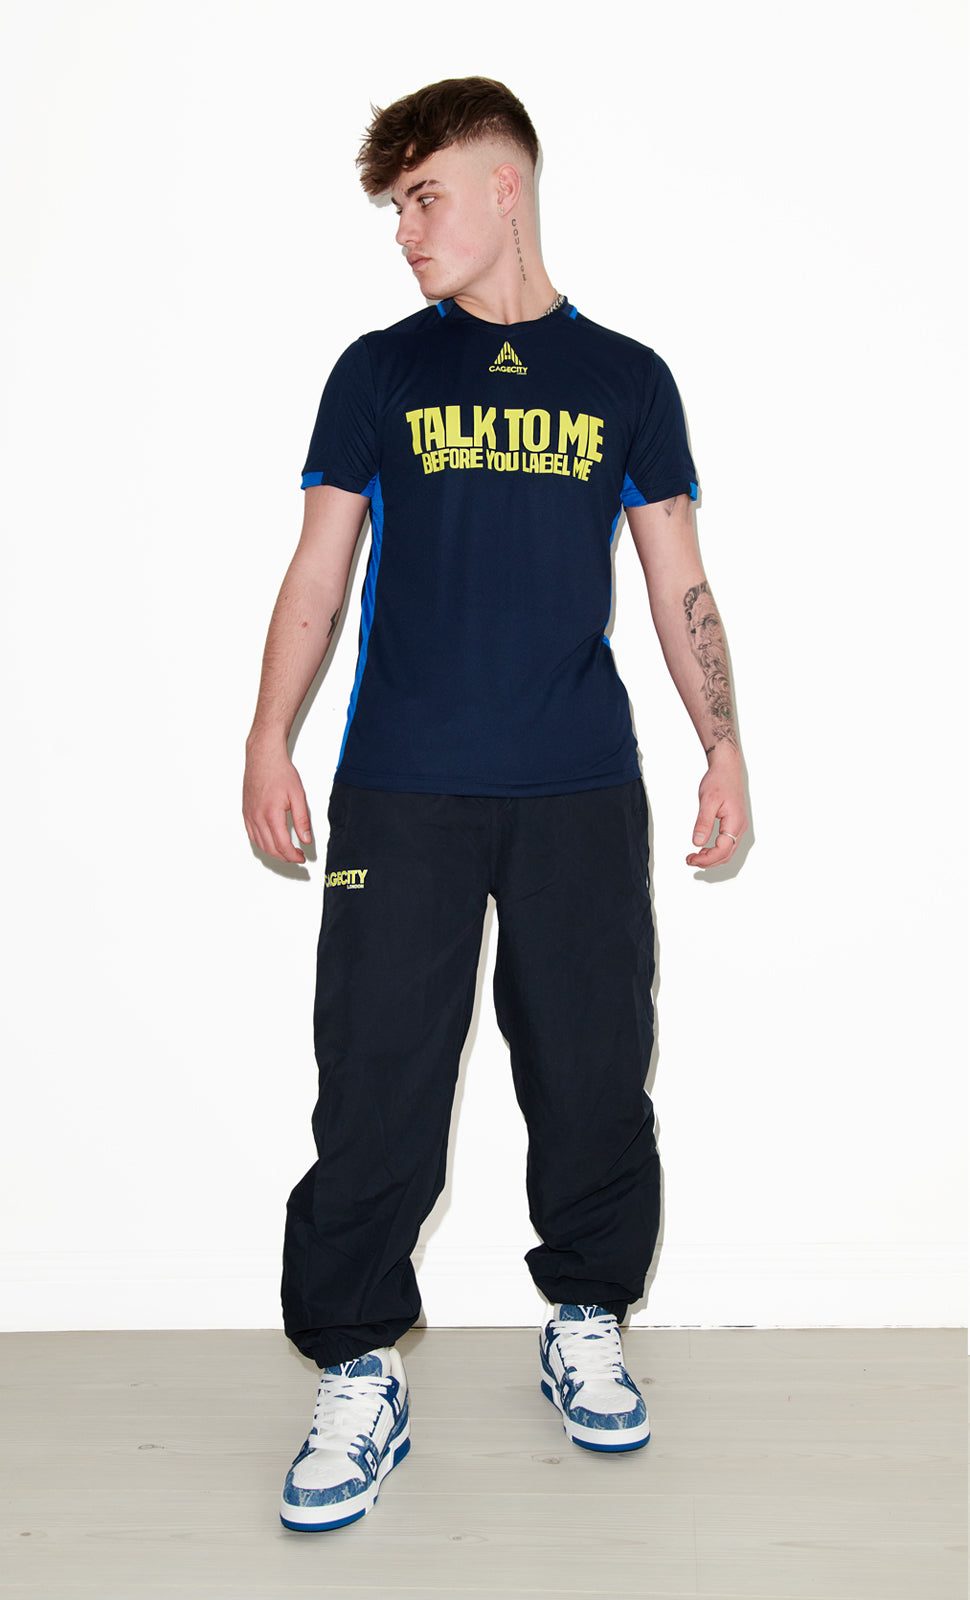 Navy Piped baggy pants